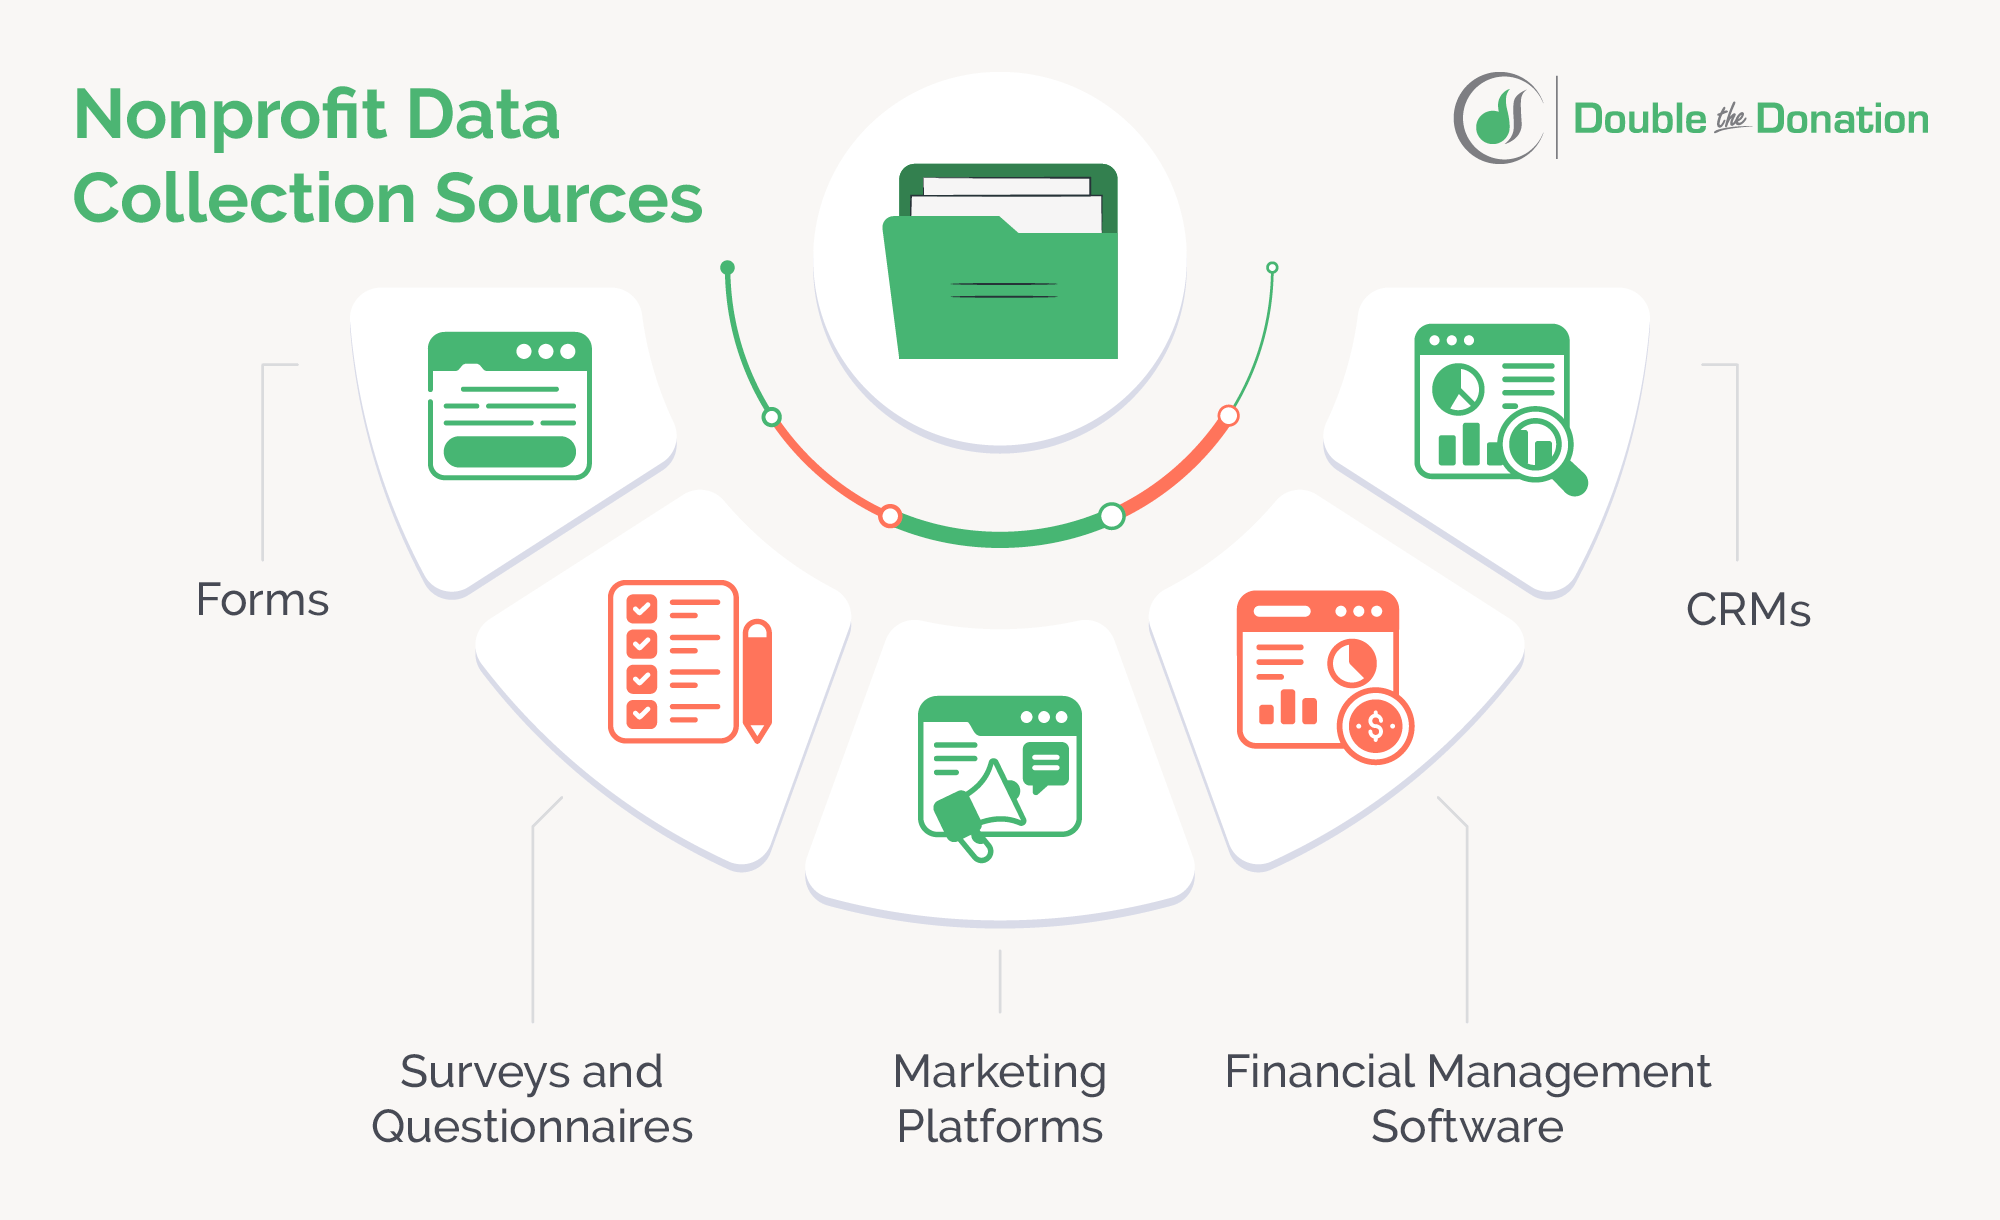 Common ways nonprofits collect data, including types of software